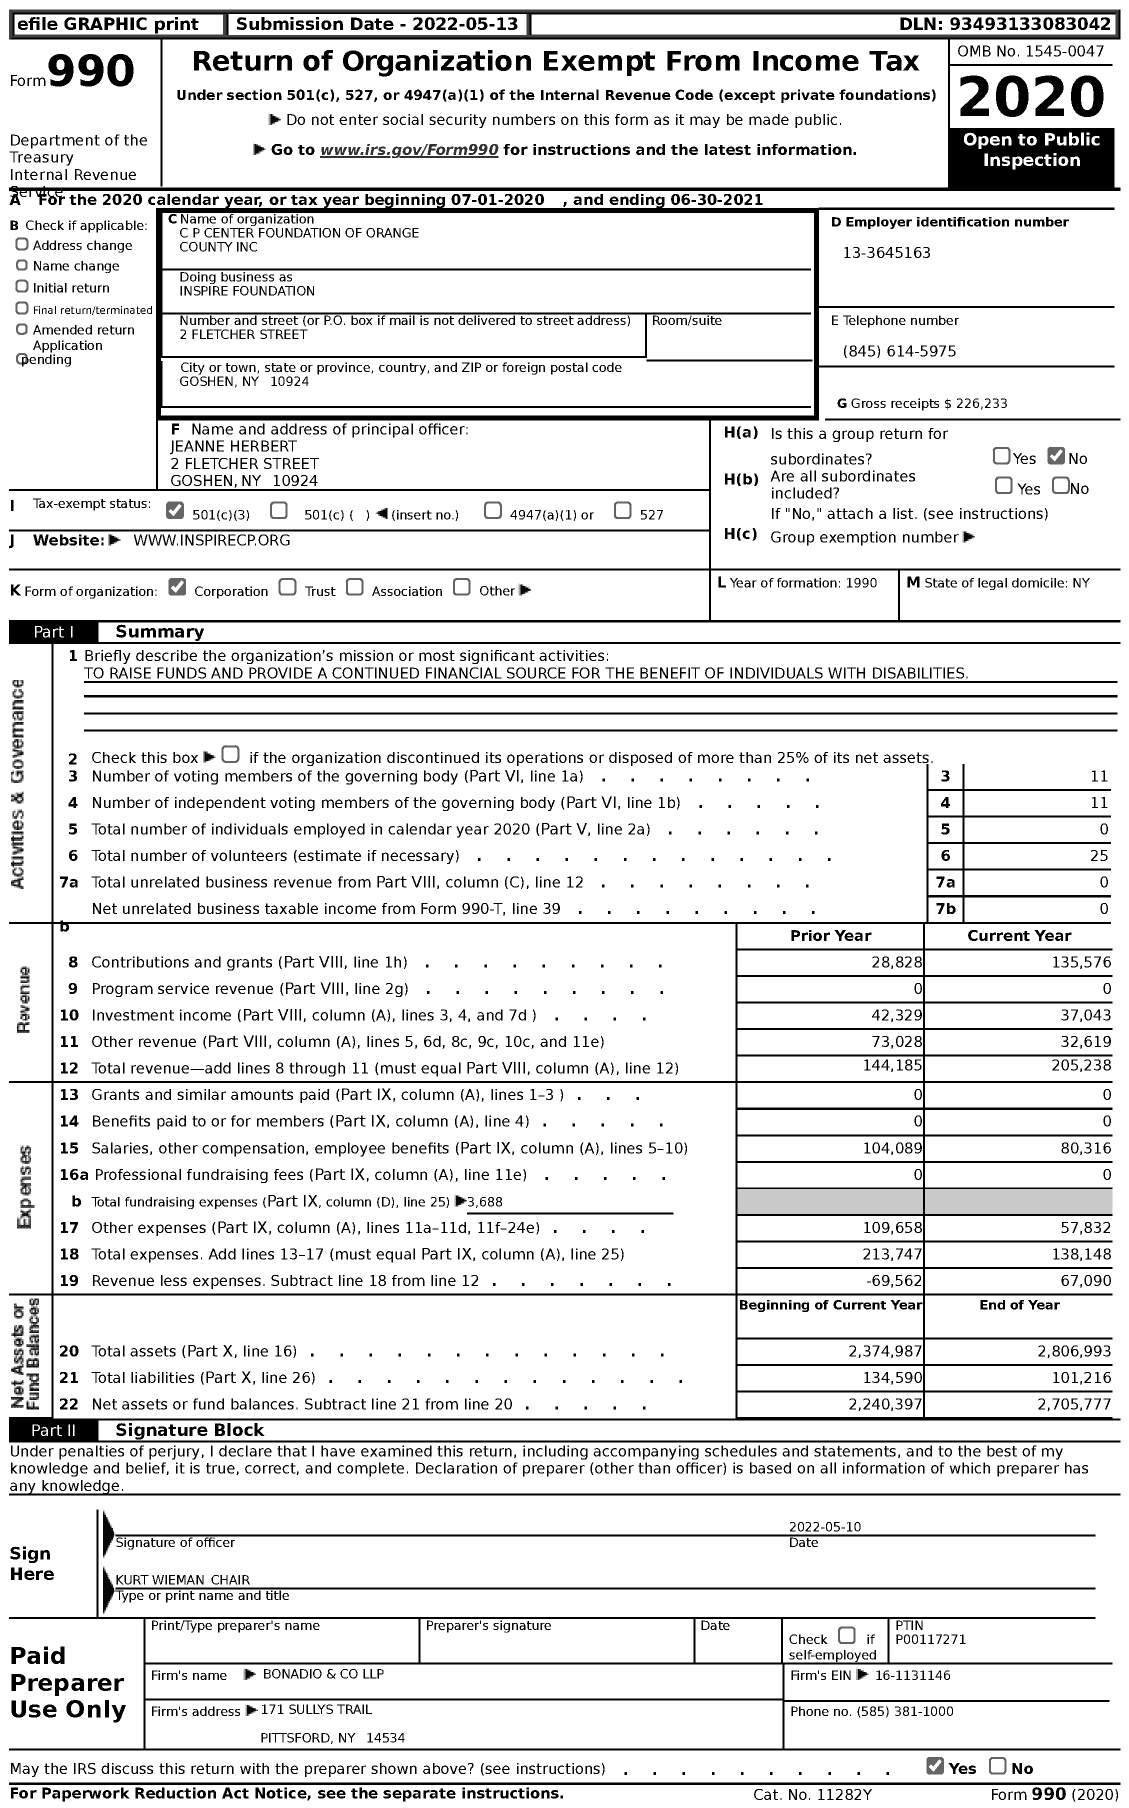 Image of first page of 2020 Form 990 for Inspire Foundation / C P Center Foundation of Orange County Inc